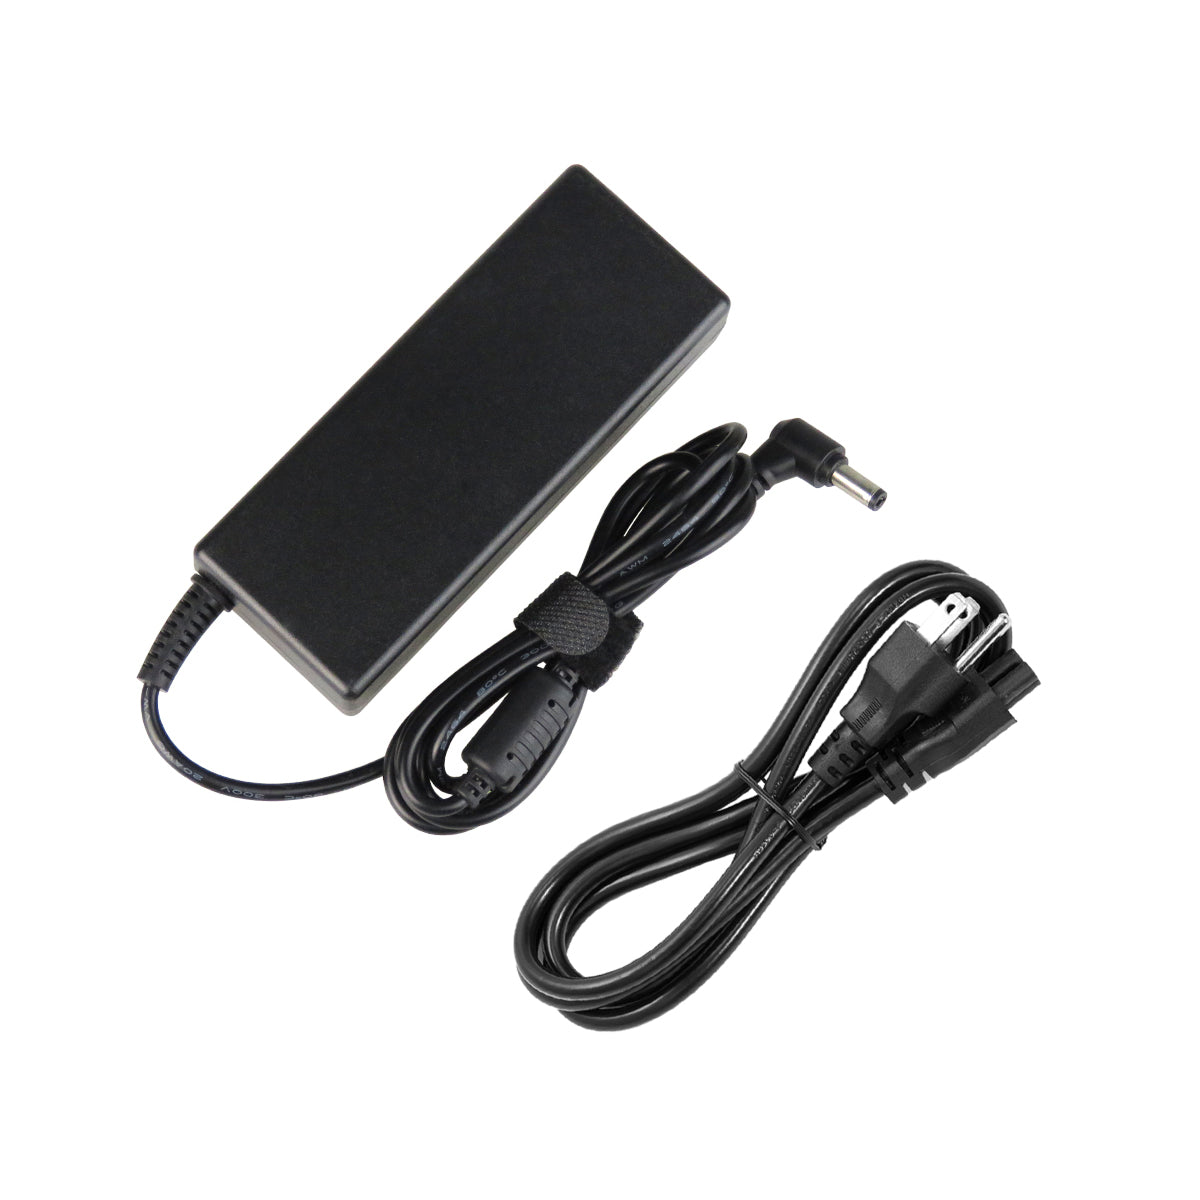 AC Adapter Charger for ASUS A8Jc Notebook.